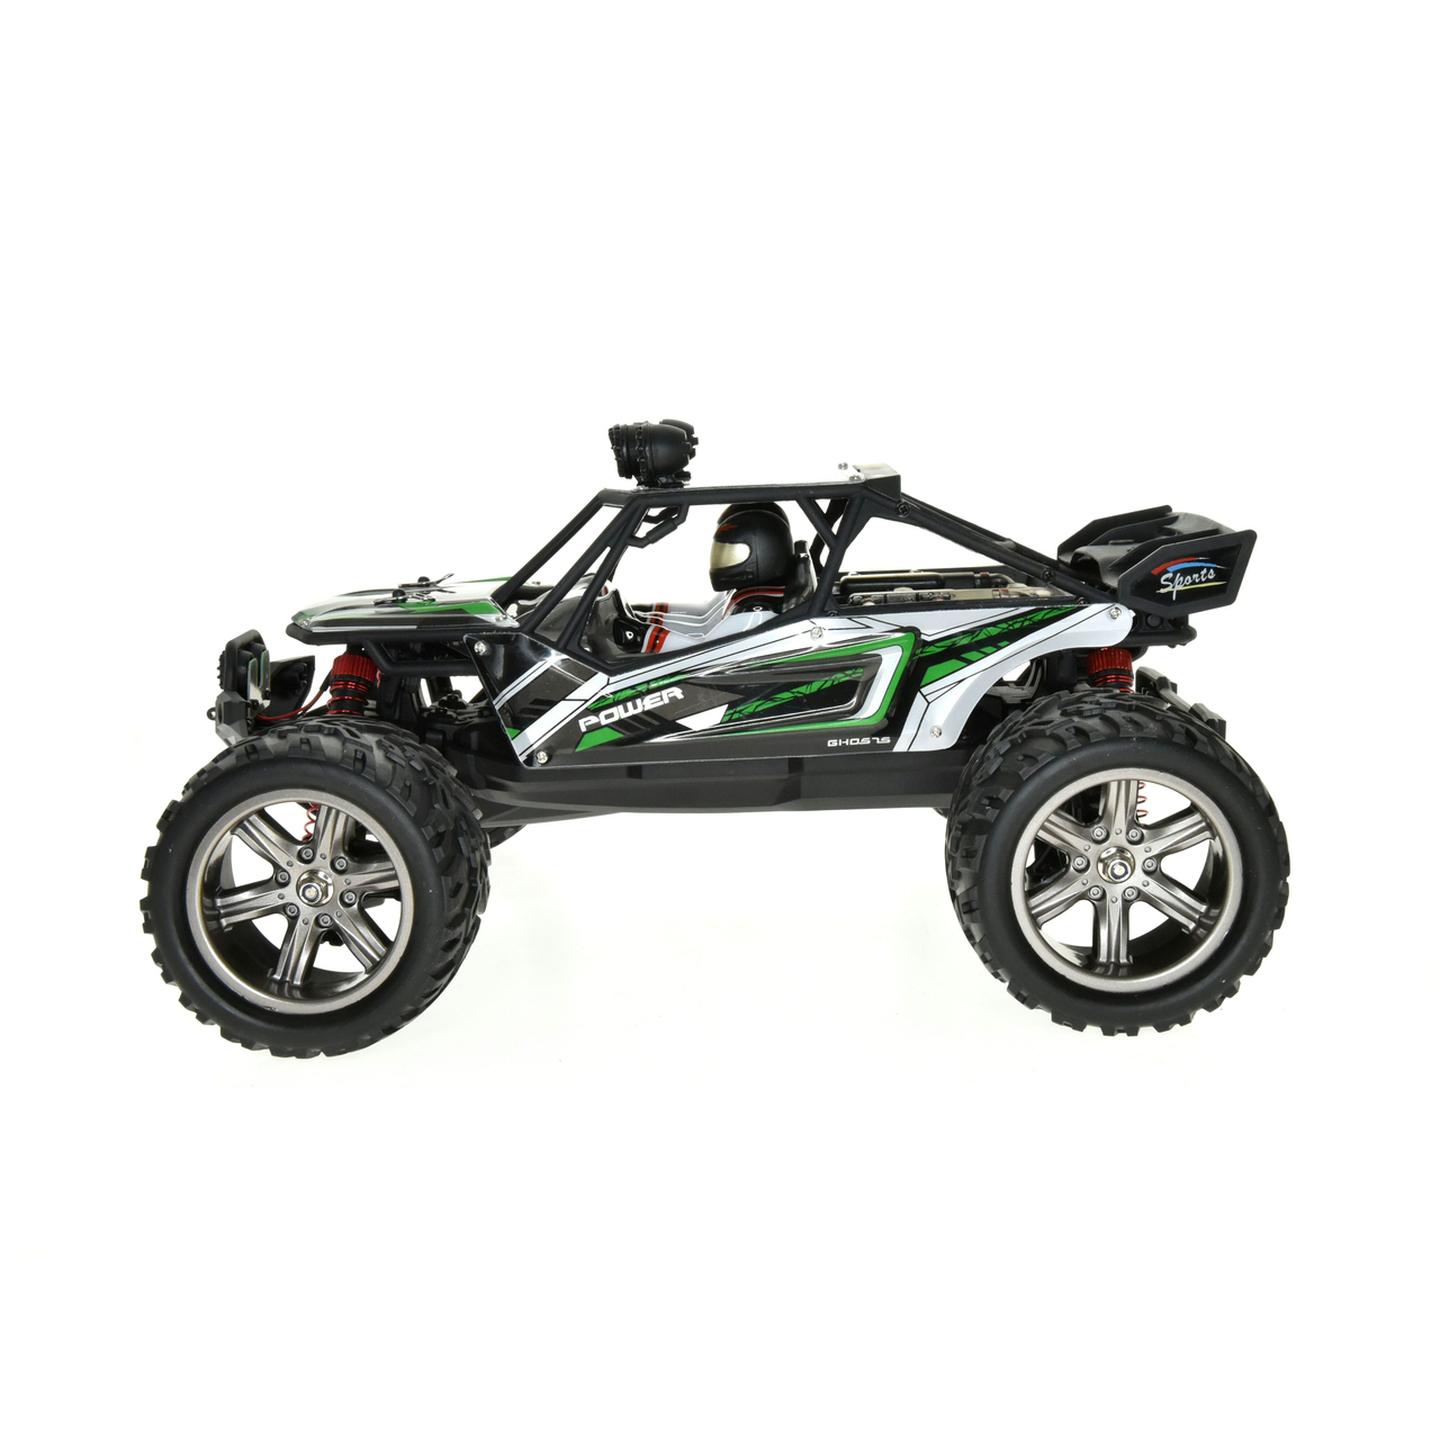 1:12 Scale Remote Control High Speed Buggy